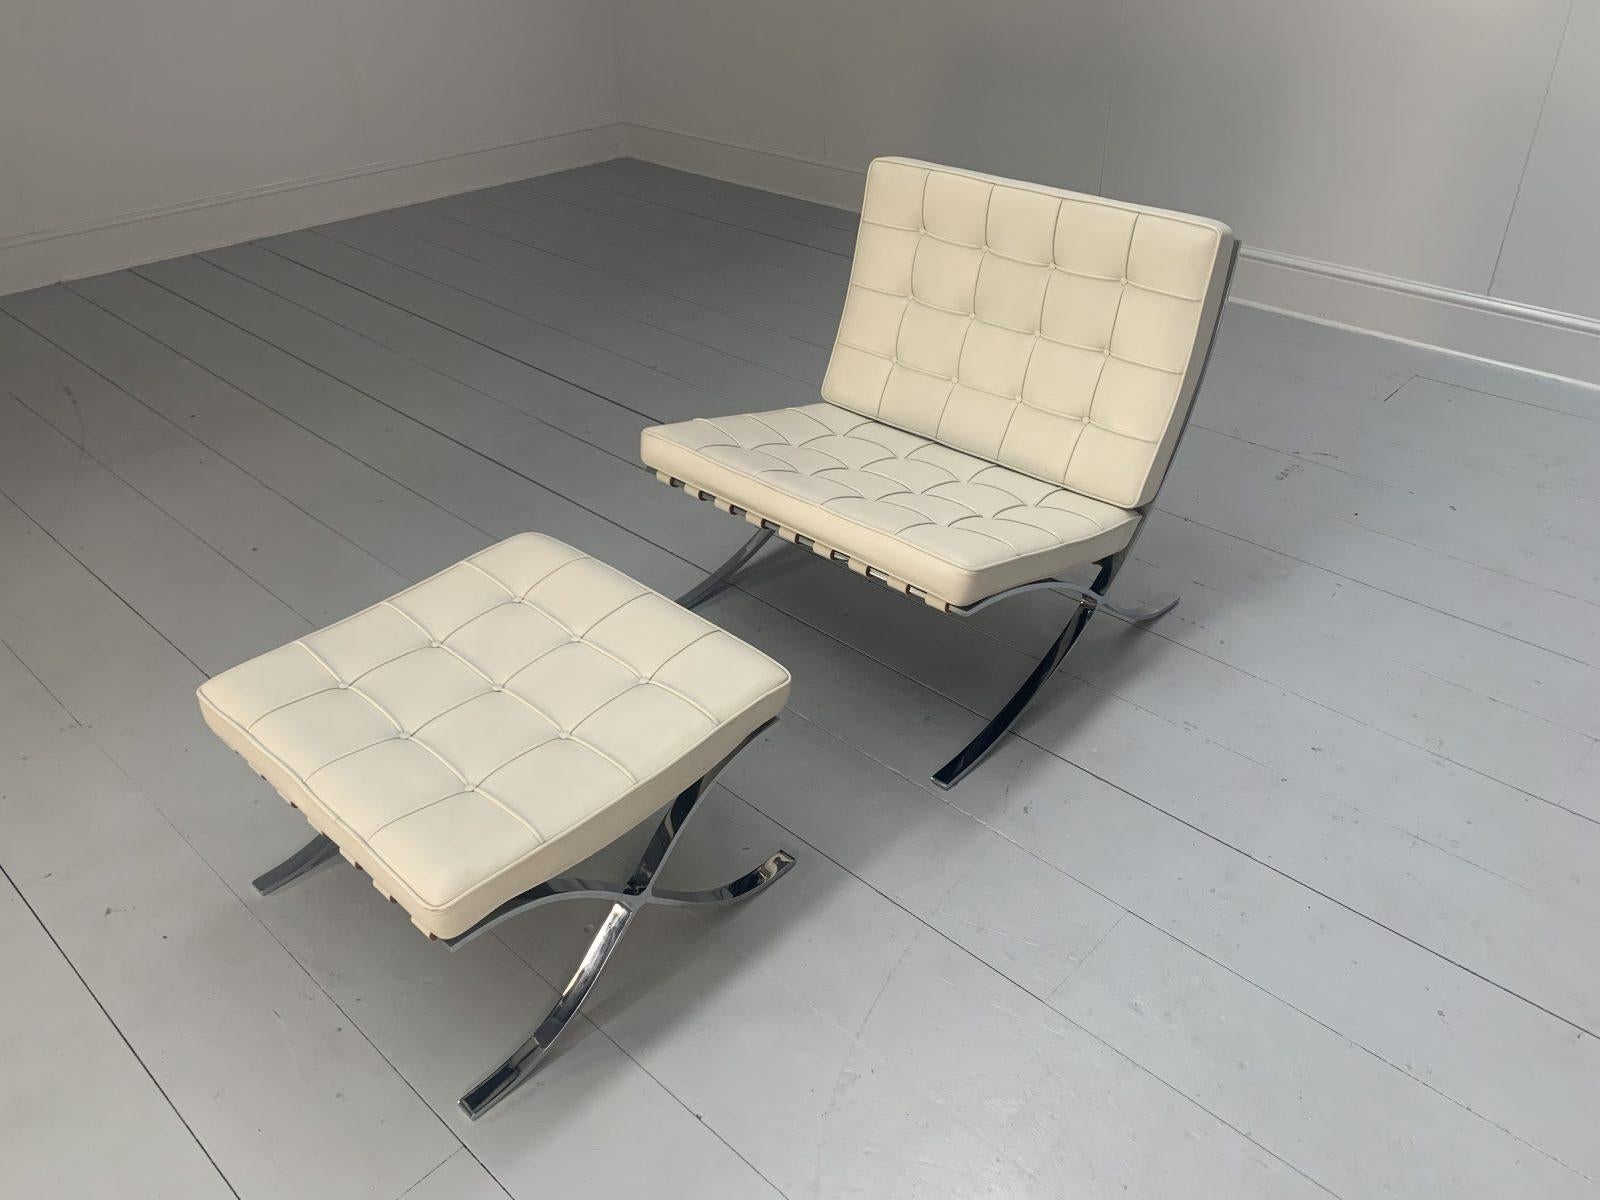 This is a rare, original “Barcelona” Lounge Chair and Ottoman Suite from the world renown furniture house of Knoll Studio, dressed in the most sublime, tactile Pale-Ivory Leather, and with Polished Chrome framework.

In a world of temporary